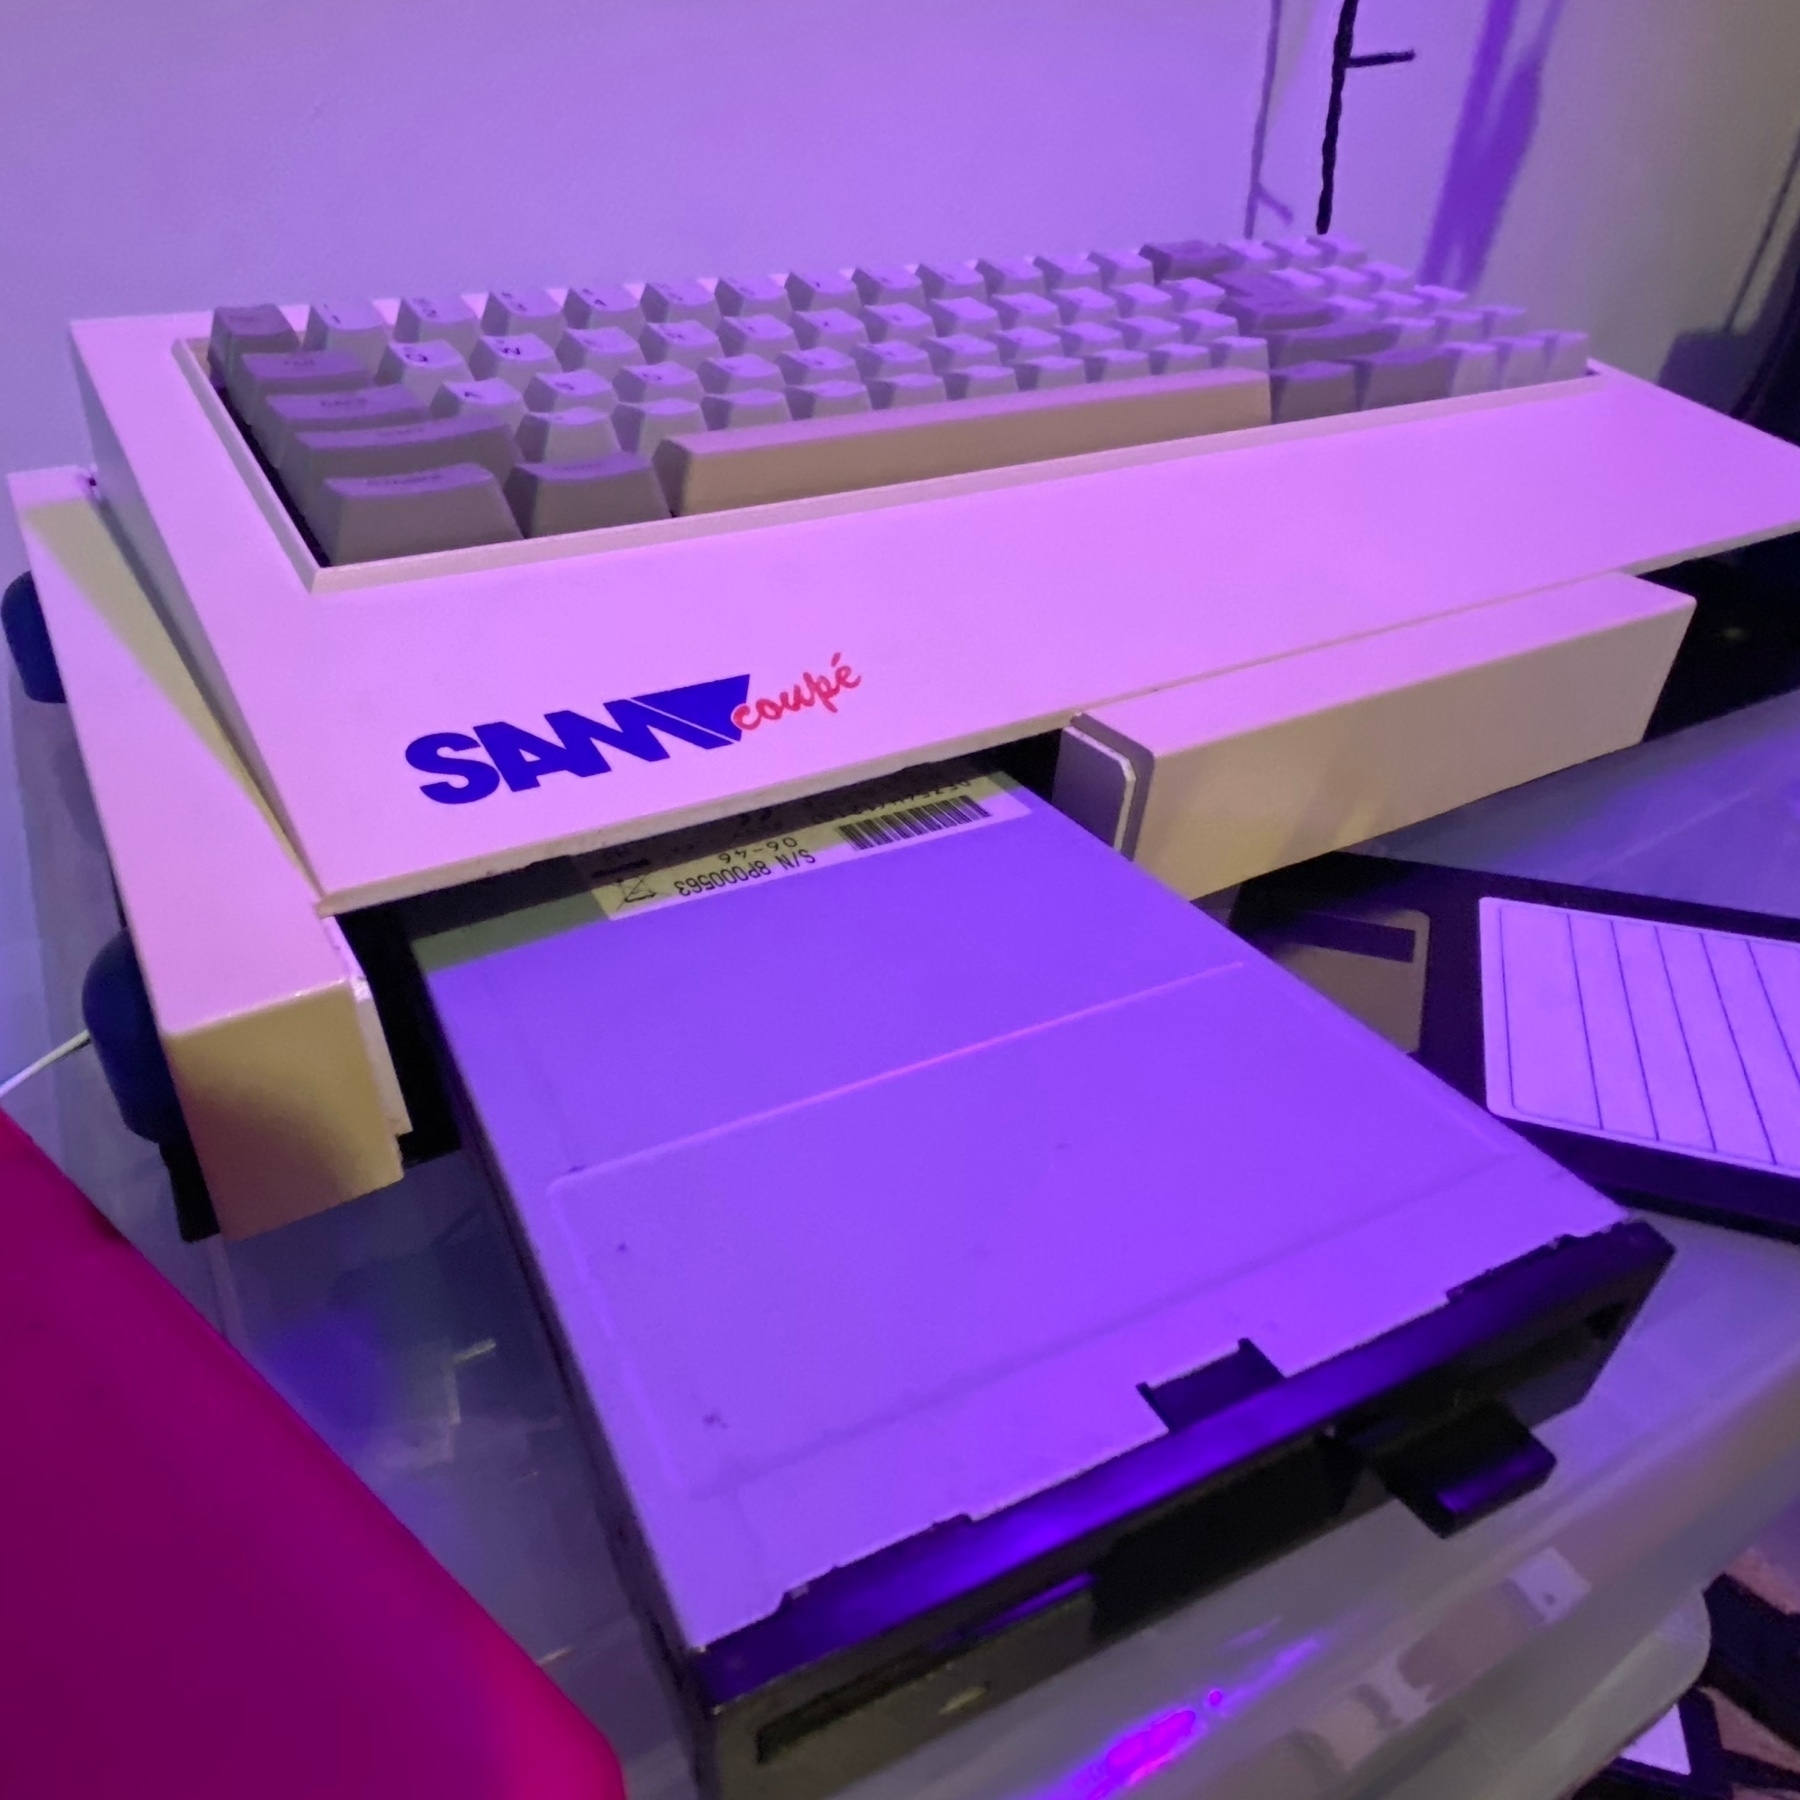 SAM Coupé computer with distended floppy disk drive